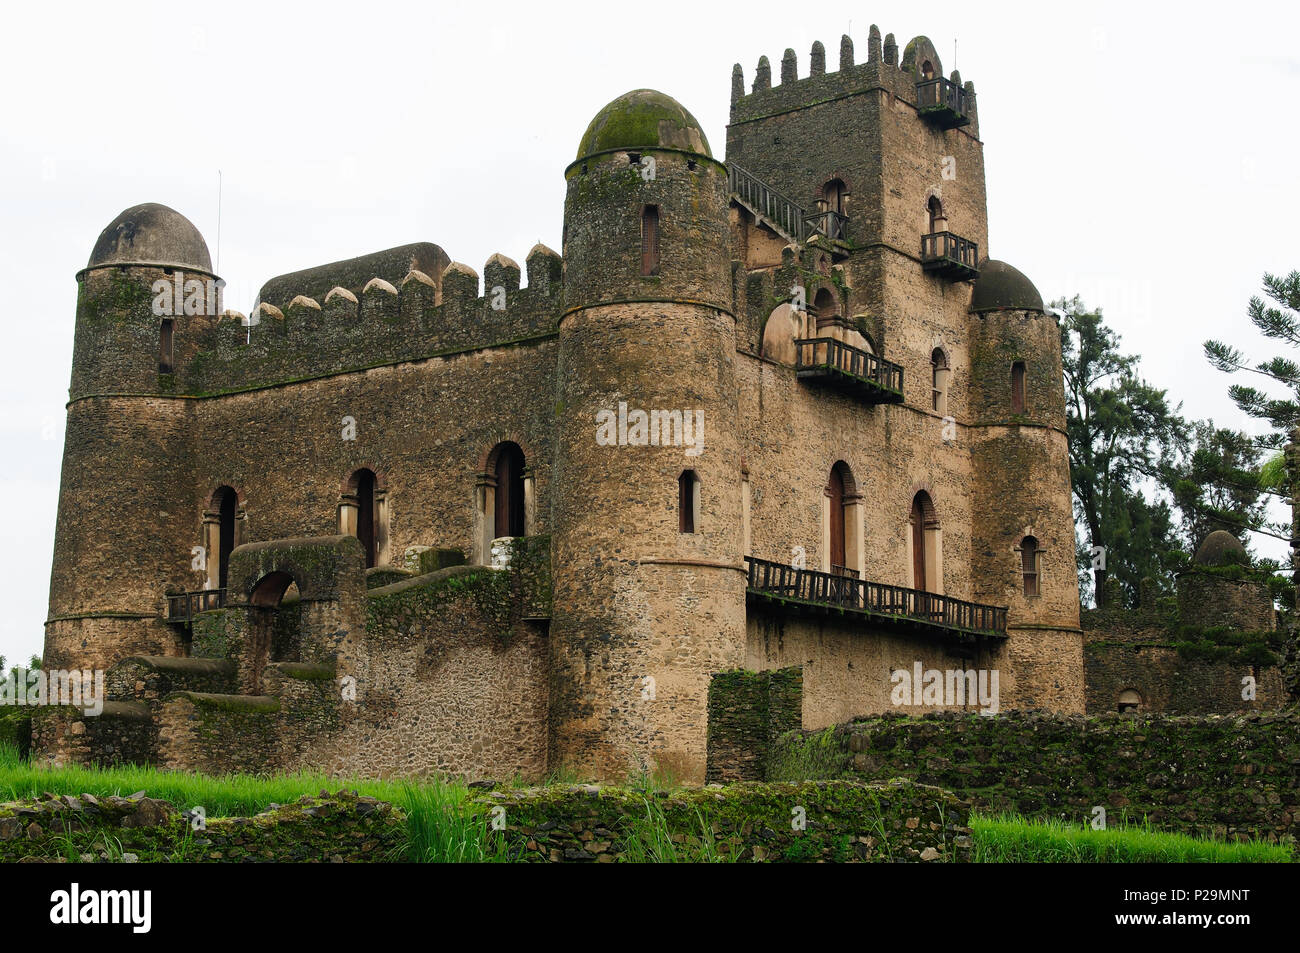 Castle built by the Emperor Fasilides  in the Gonder town in Ethiopia, Royal Enclosure Stock Photo